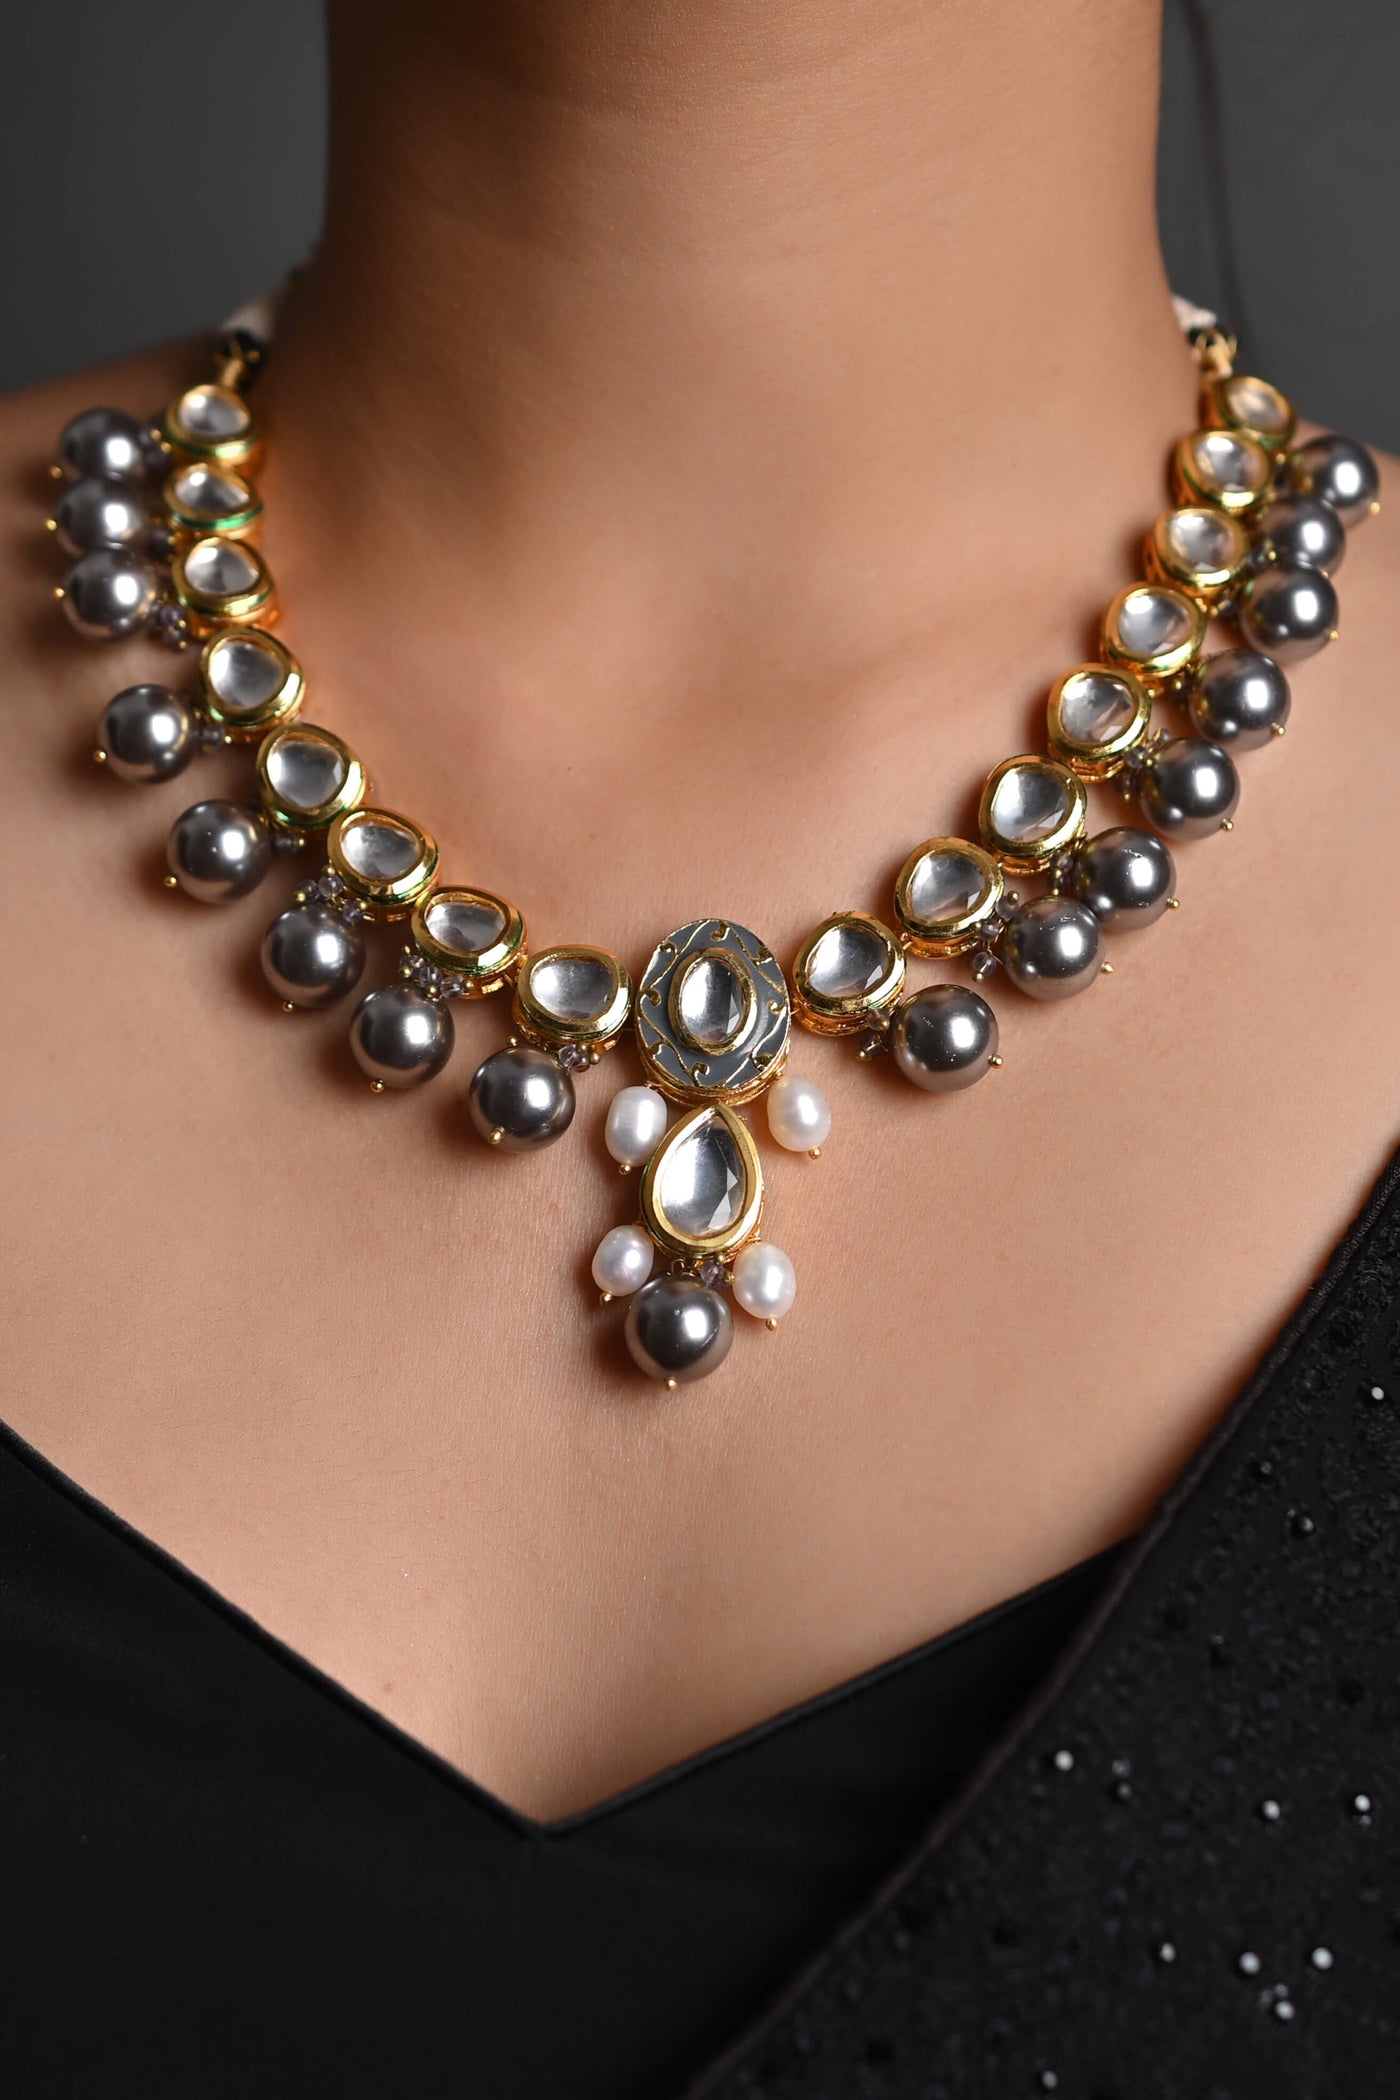 Tear-Drop Kundan & Pearl Beads Stone Gold Necklace With Earrings